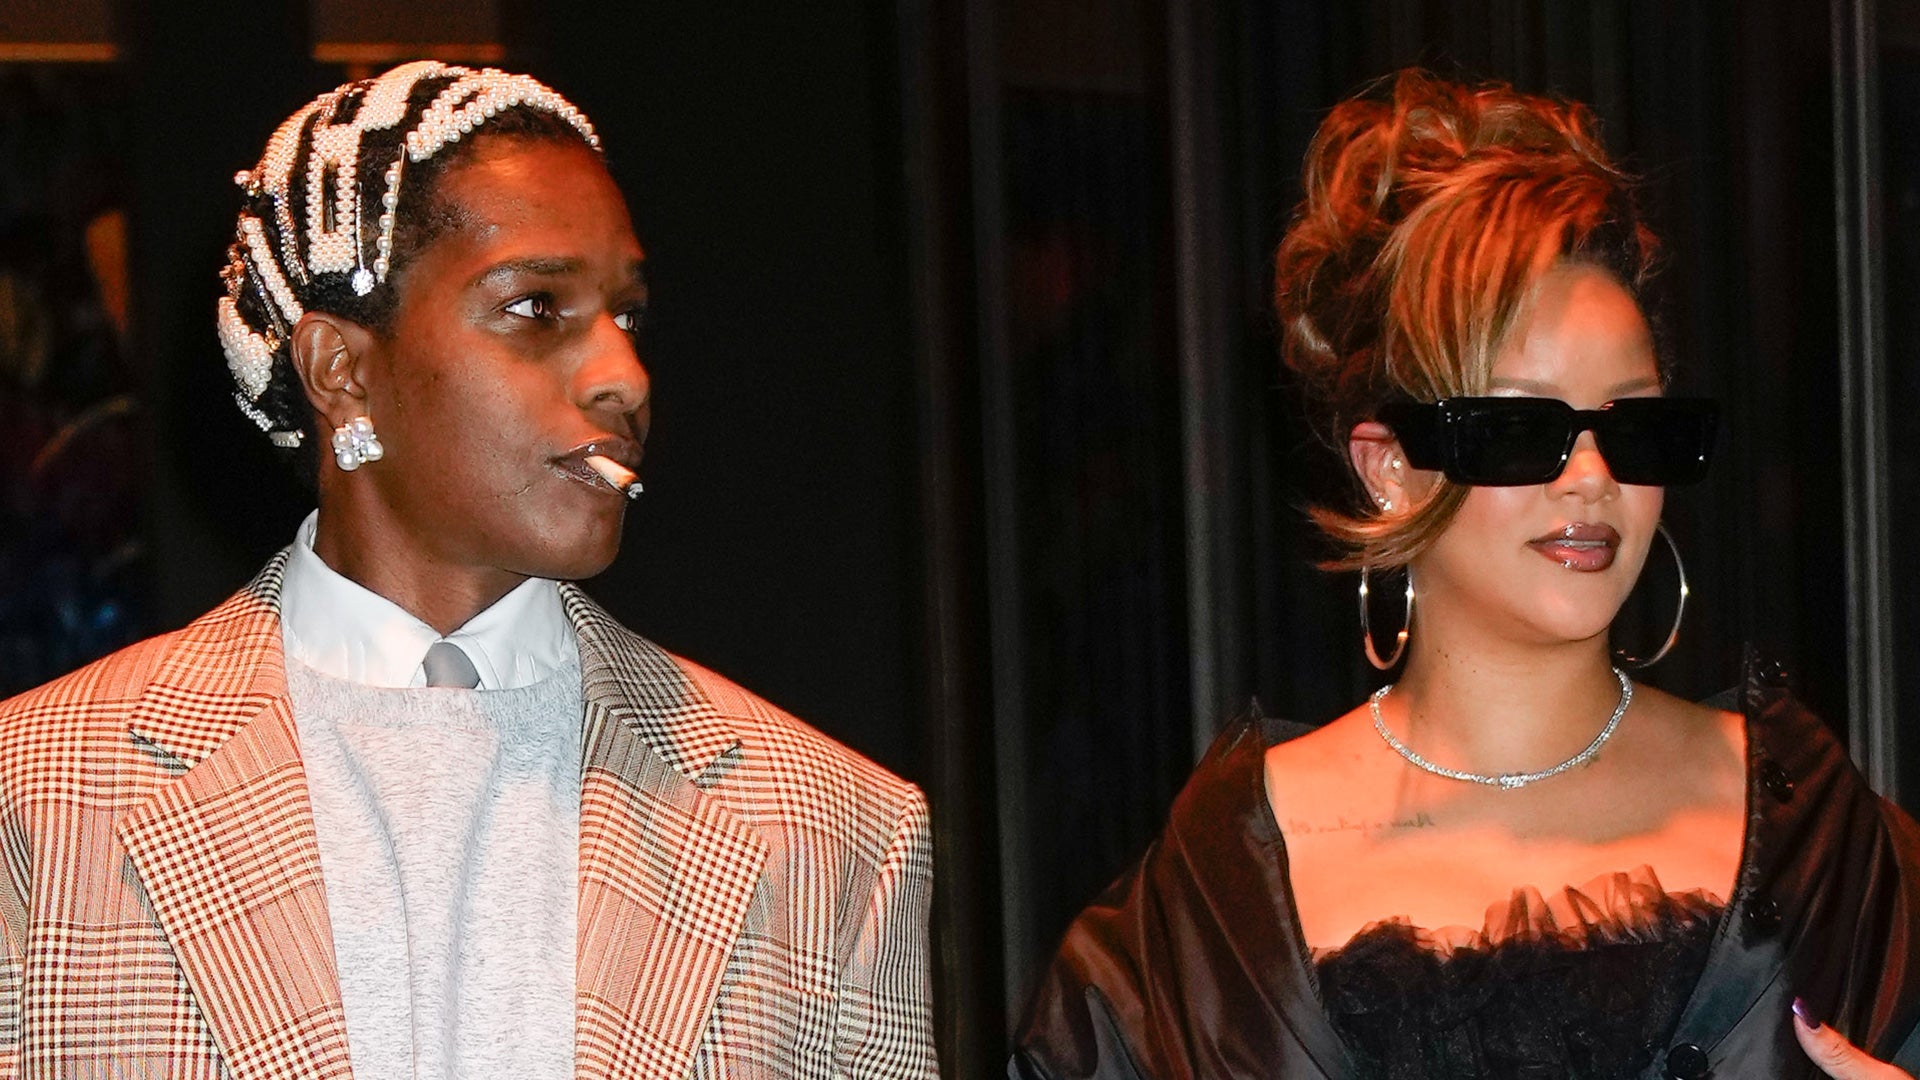 Rihanna News on X: Rihanna and A$AP Rocky at the Louis Vuitton fashion  show last night in Paris.  / X